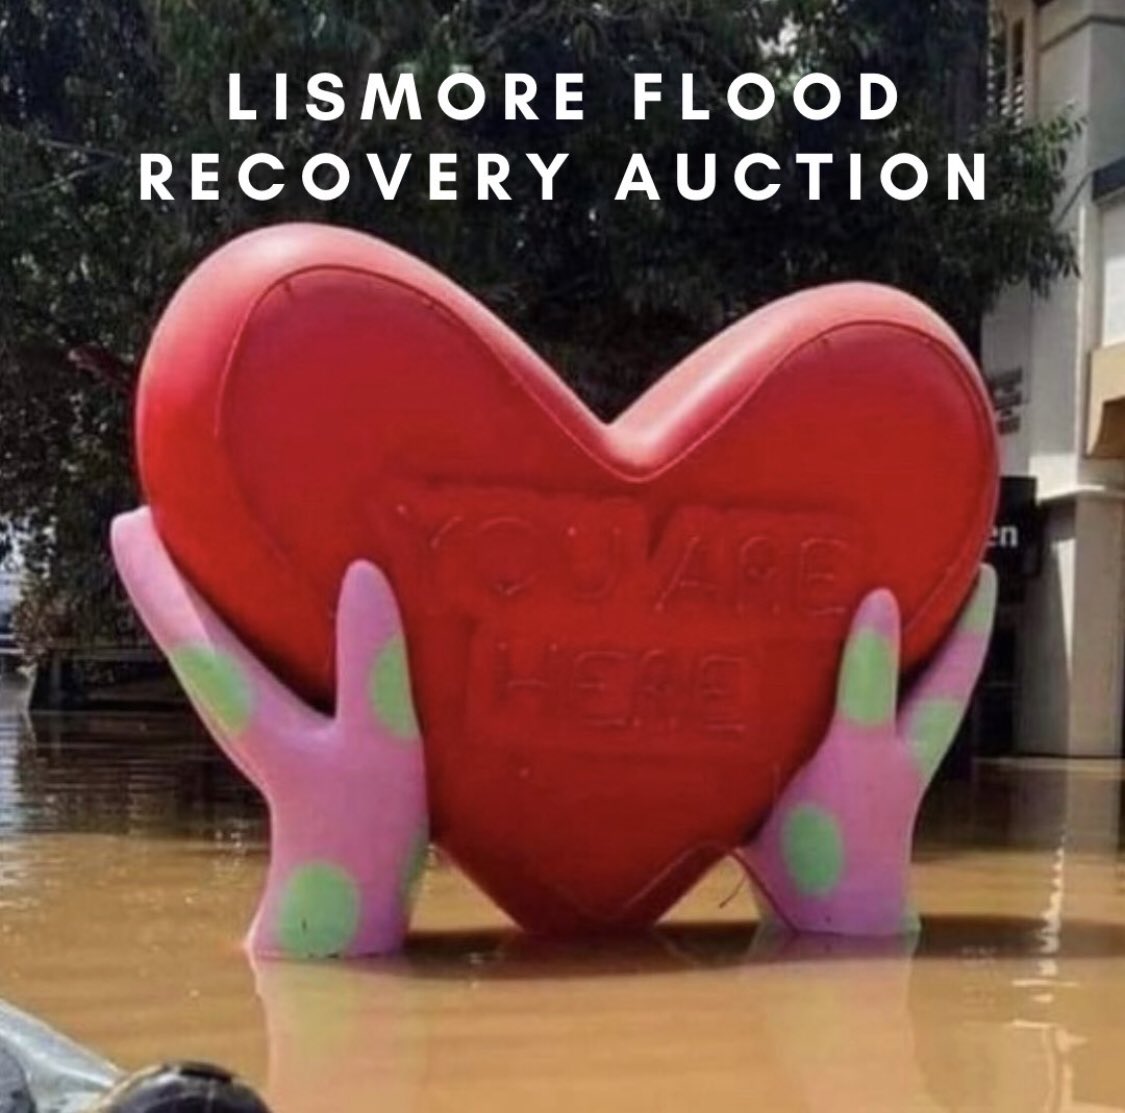 6 days left to place a bid in the #LismoreFloods Recovery Auction. From original artwork to #author visits, signed #books to manuscript assessments there are so many awesome items on offer. (Over $45K raised so far! ❤️) Check it out and make a bid!

airauctioneer.com/lismore-flood-…